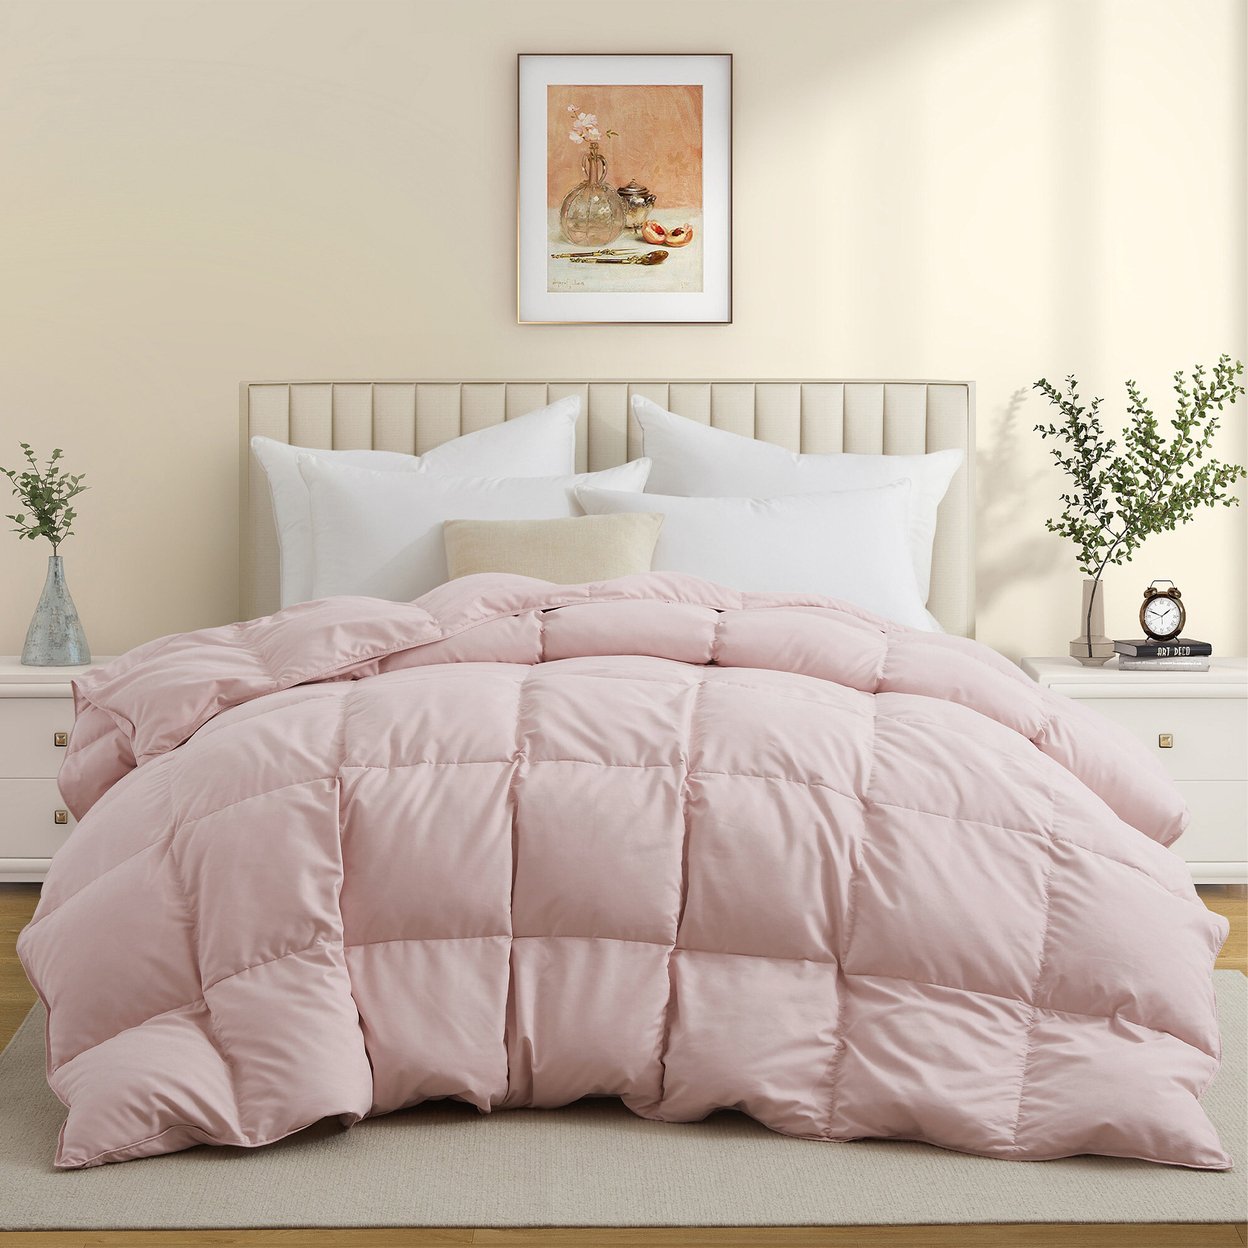 Premium All Seasons White Goose Feather Fiber And Down Comforter - Lotus Pink, Twin